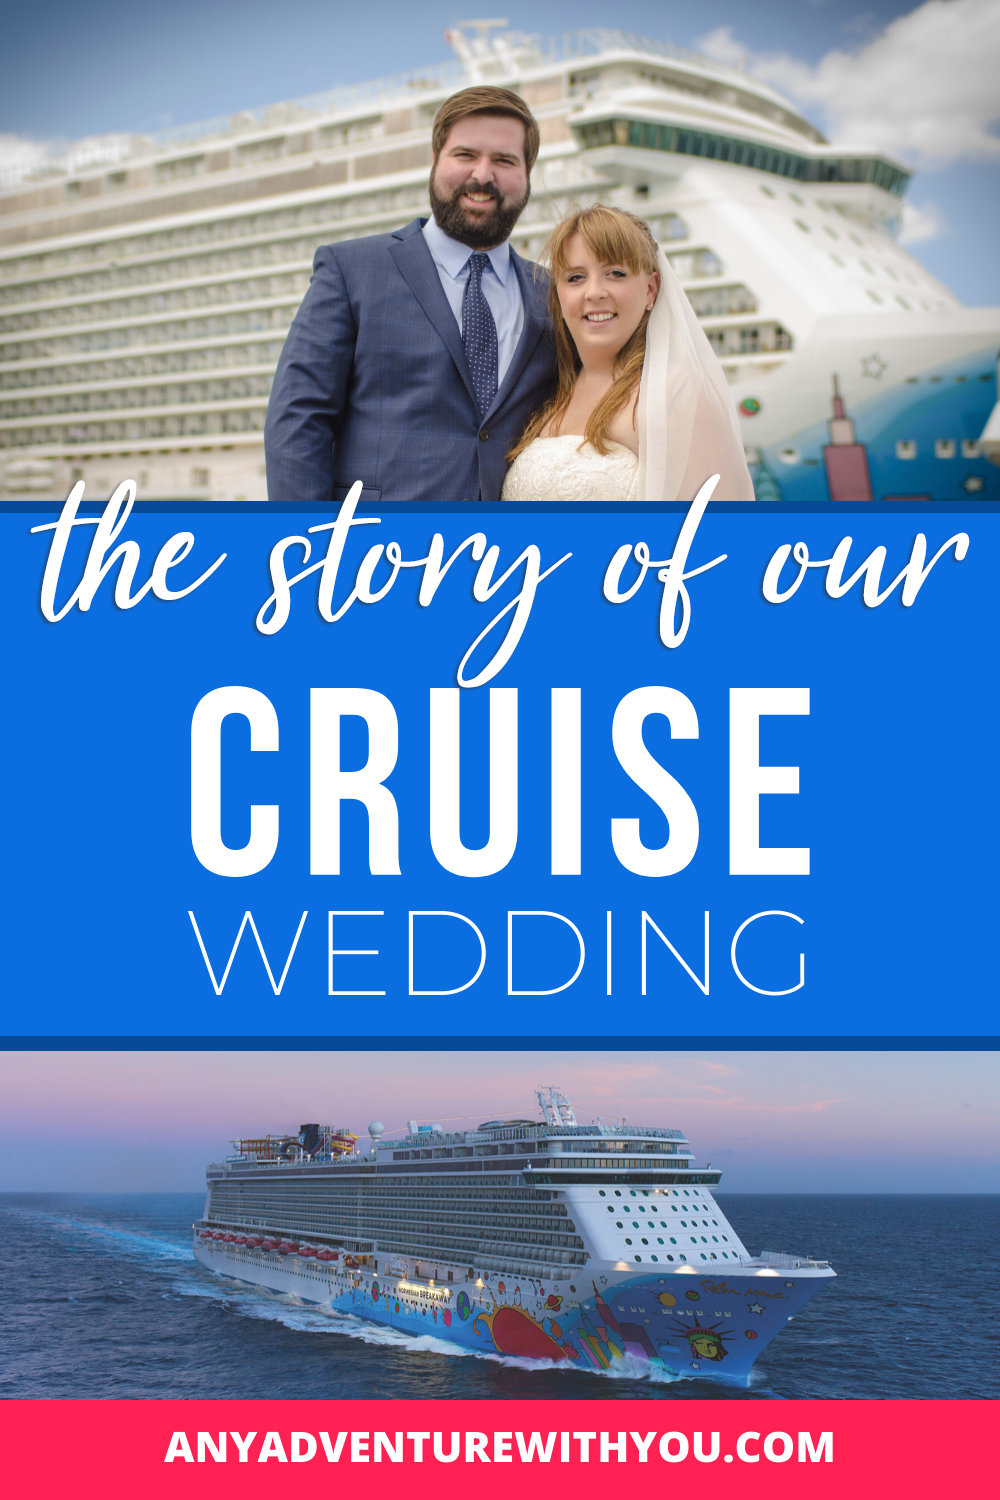 I was standing at the other end of the aisle from the love of my life. My cheeks hurt from smiling because our wedding, was finally here. In this post, I tell the story of our cruise wedding on the Norwegian Breakaway. #DestinationWedding #CruiseWedding  #DestinationWeddingPlanning #DestinationWeddingTips #WeddingPlanning #WeddingTips